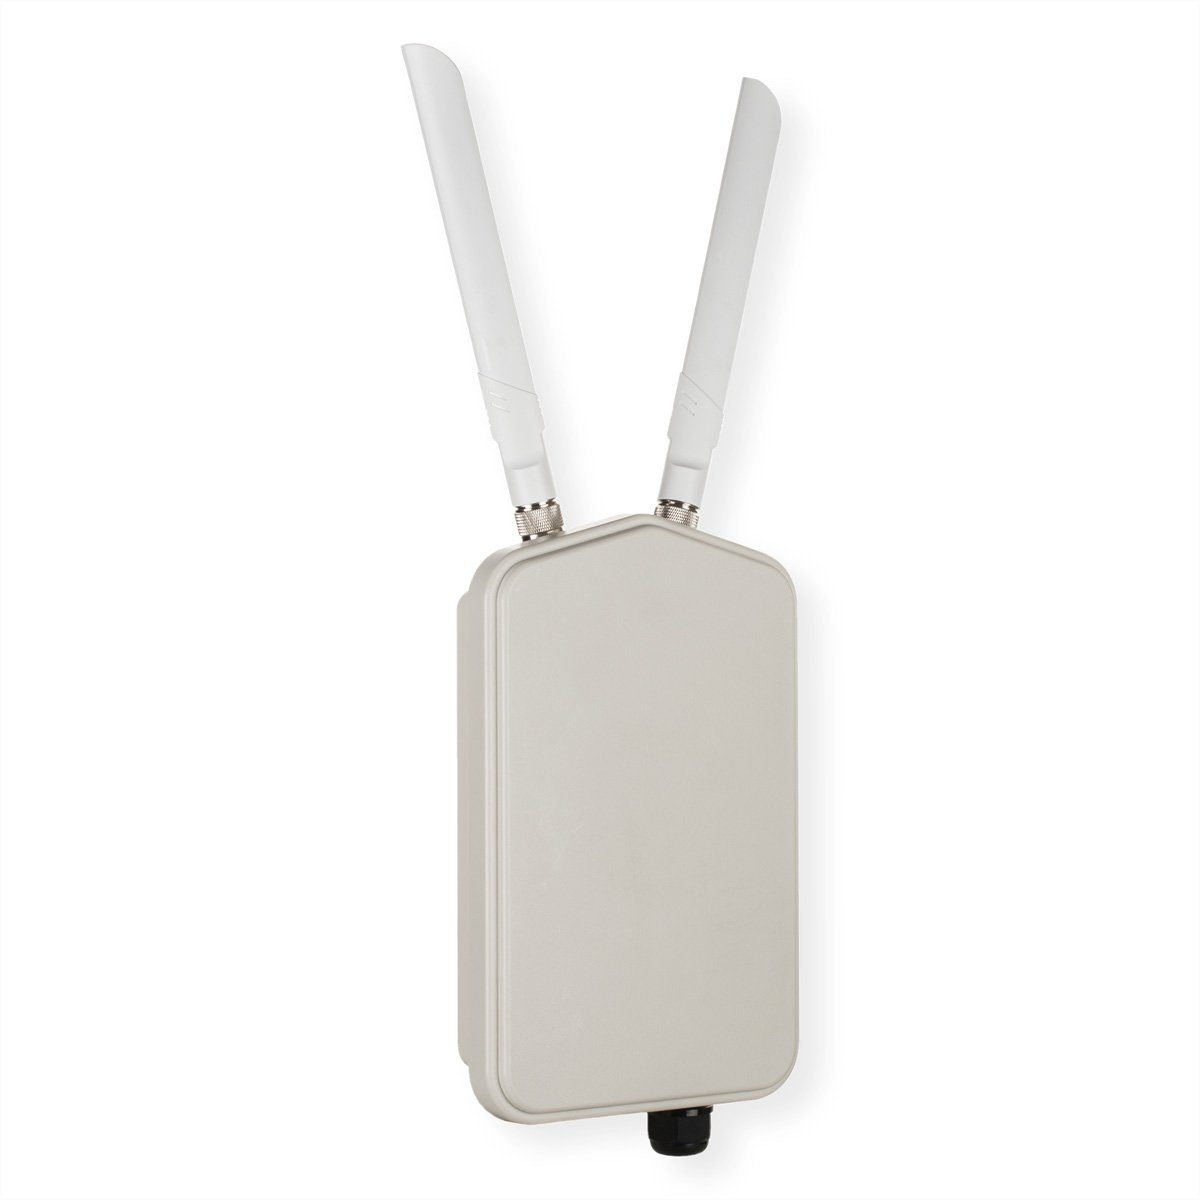 WLAN-Repeater AC1300 Wave Outdoor 2 Band Access D-Link DWL-8720AP Dual Unified Point